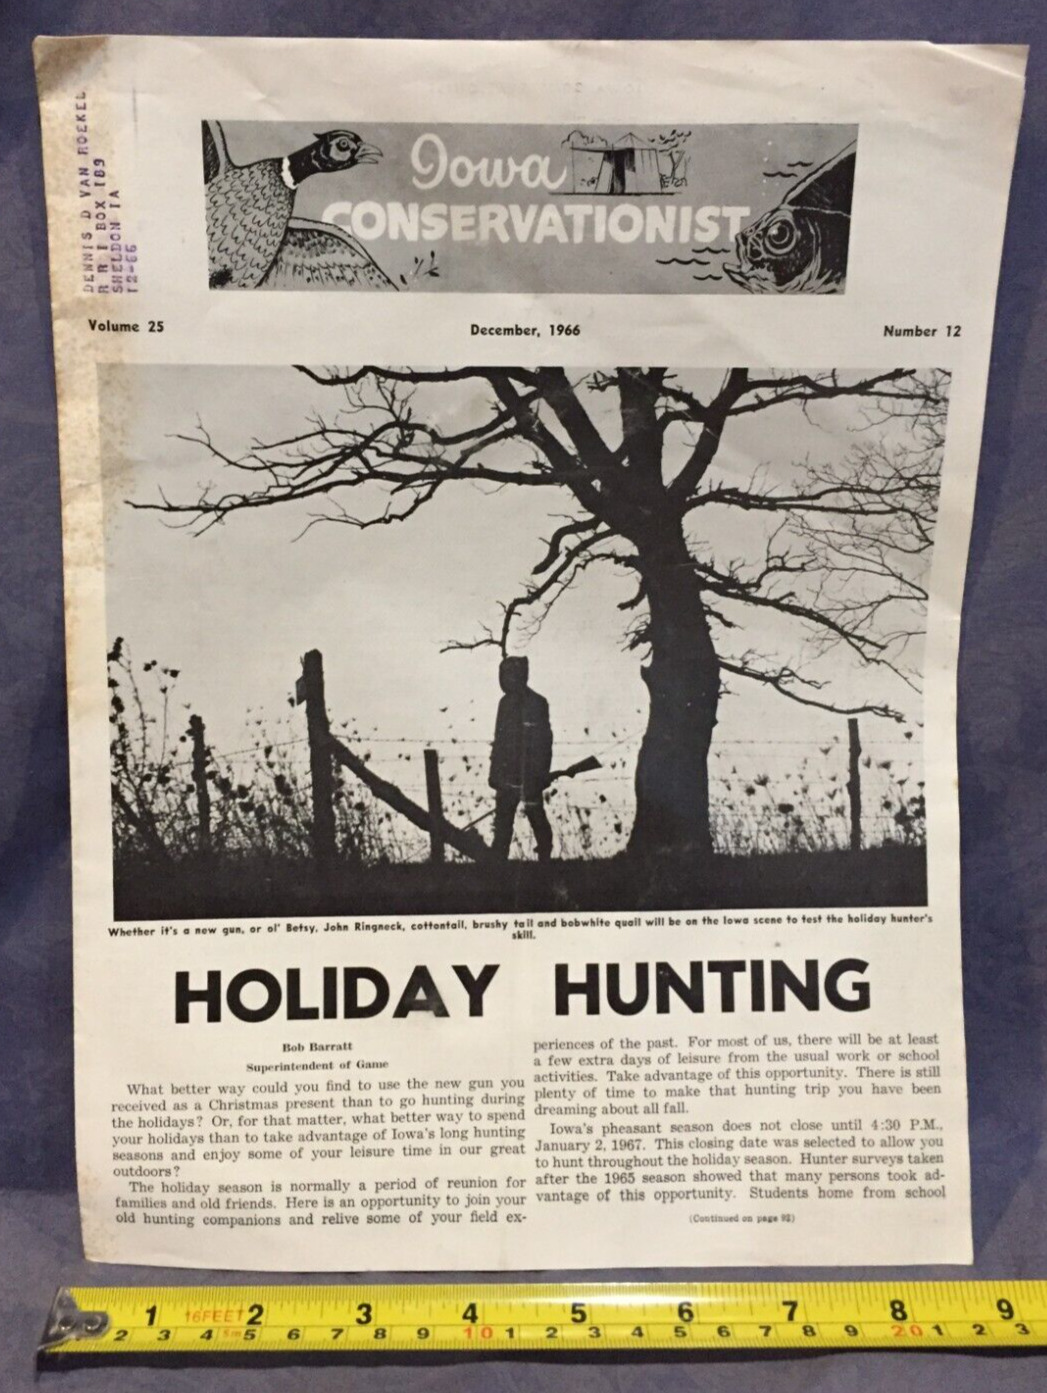 Iowa Conservationist December 1966 Holiday Hunting